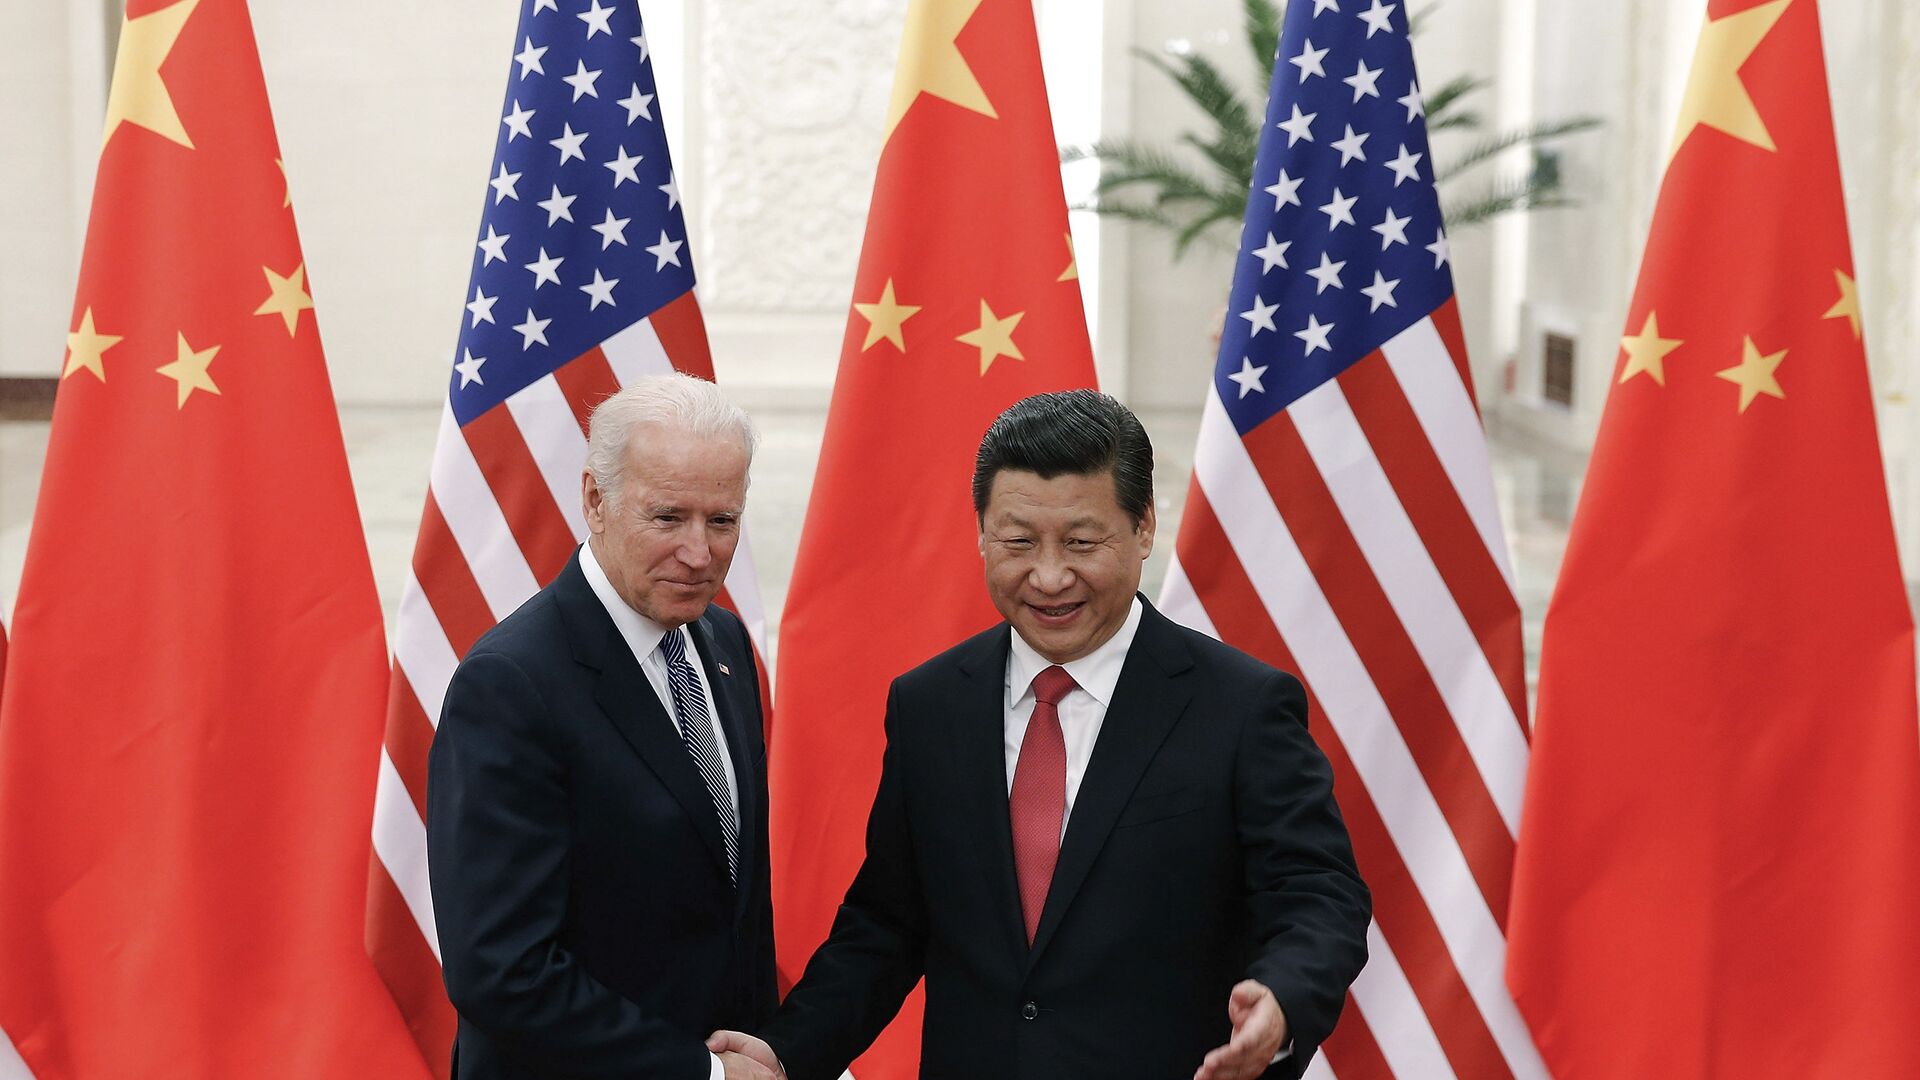 FILE - In this Dec. 4, 2013, file photo, Chinese President Xi Jinping, right, shakes hands with then U.S. Vice President Joe Biden as they pose for photos at the Great Hall of the People in Beijing. - Sputnik International, 1920, 18.03.2022